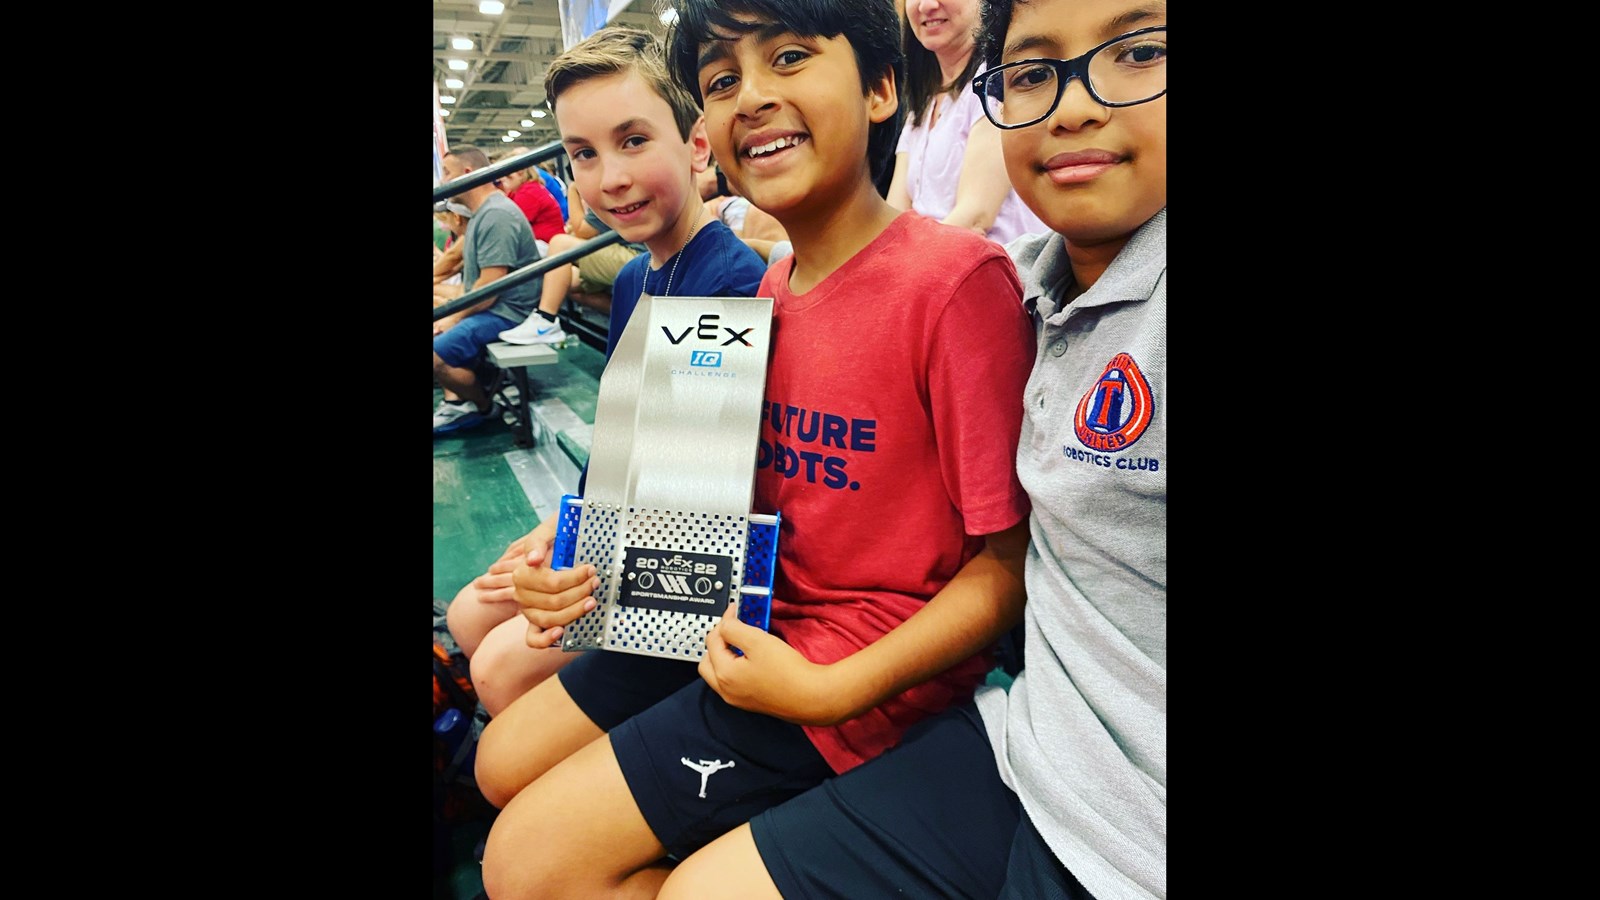 Tritt Elementary School recently competed at an international robotics competition.